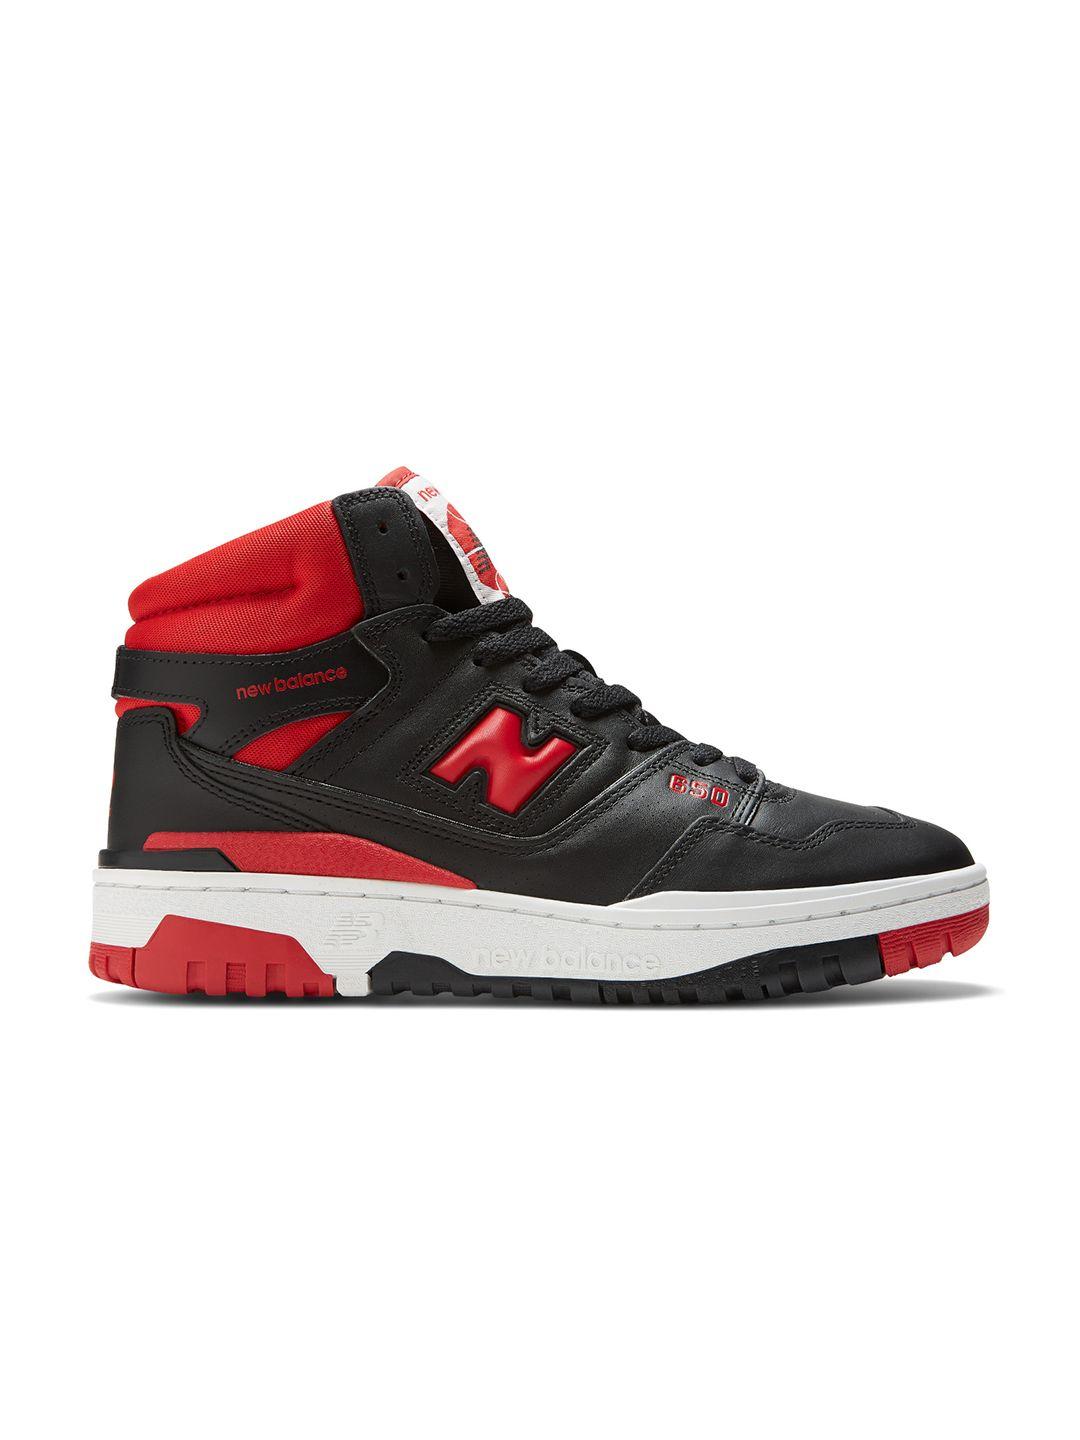 new balance men bb650 training or gym non-marking shoes